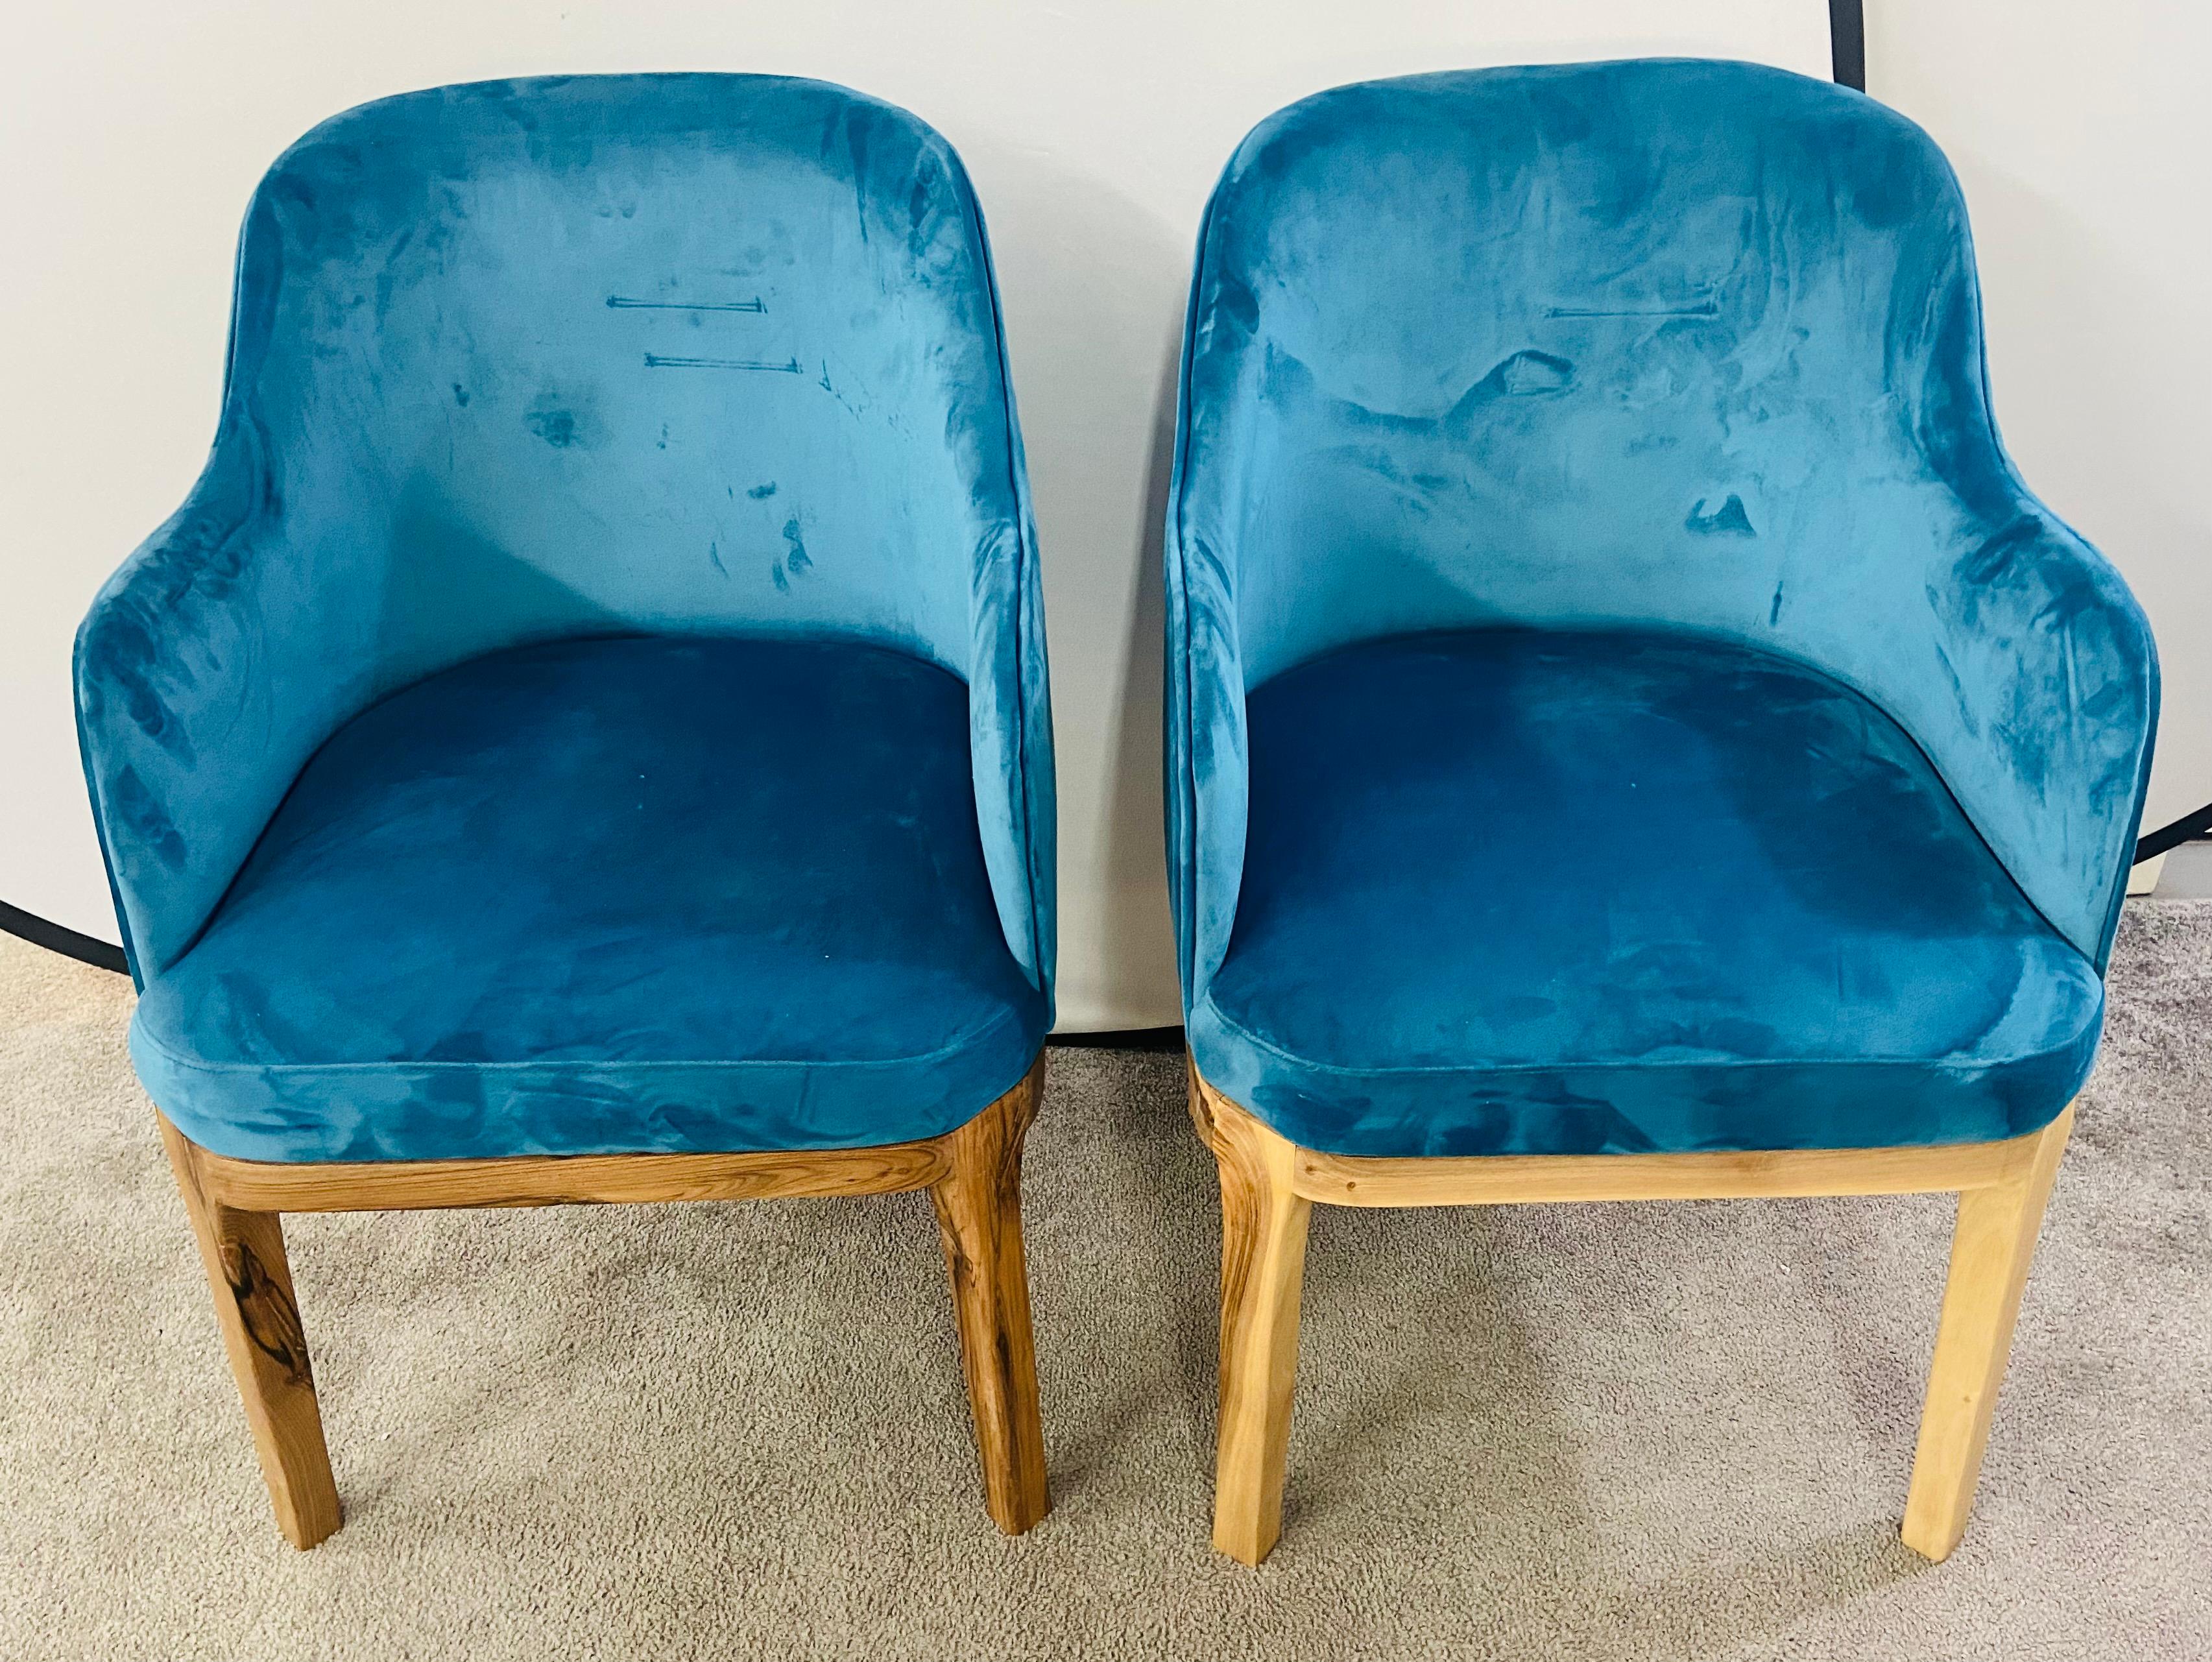 A stylish pair of Mid Century Modern style barrel chairs. The chairs feature a recent upholstery in an electric vivid blue velvet. a highly desirable and fashionable color. The high quality chairs are made of walnut wood. The natural color of the